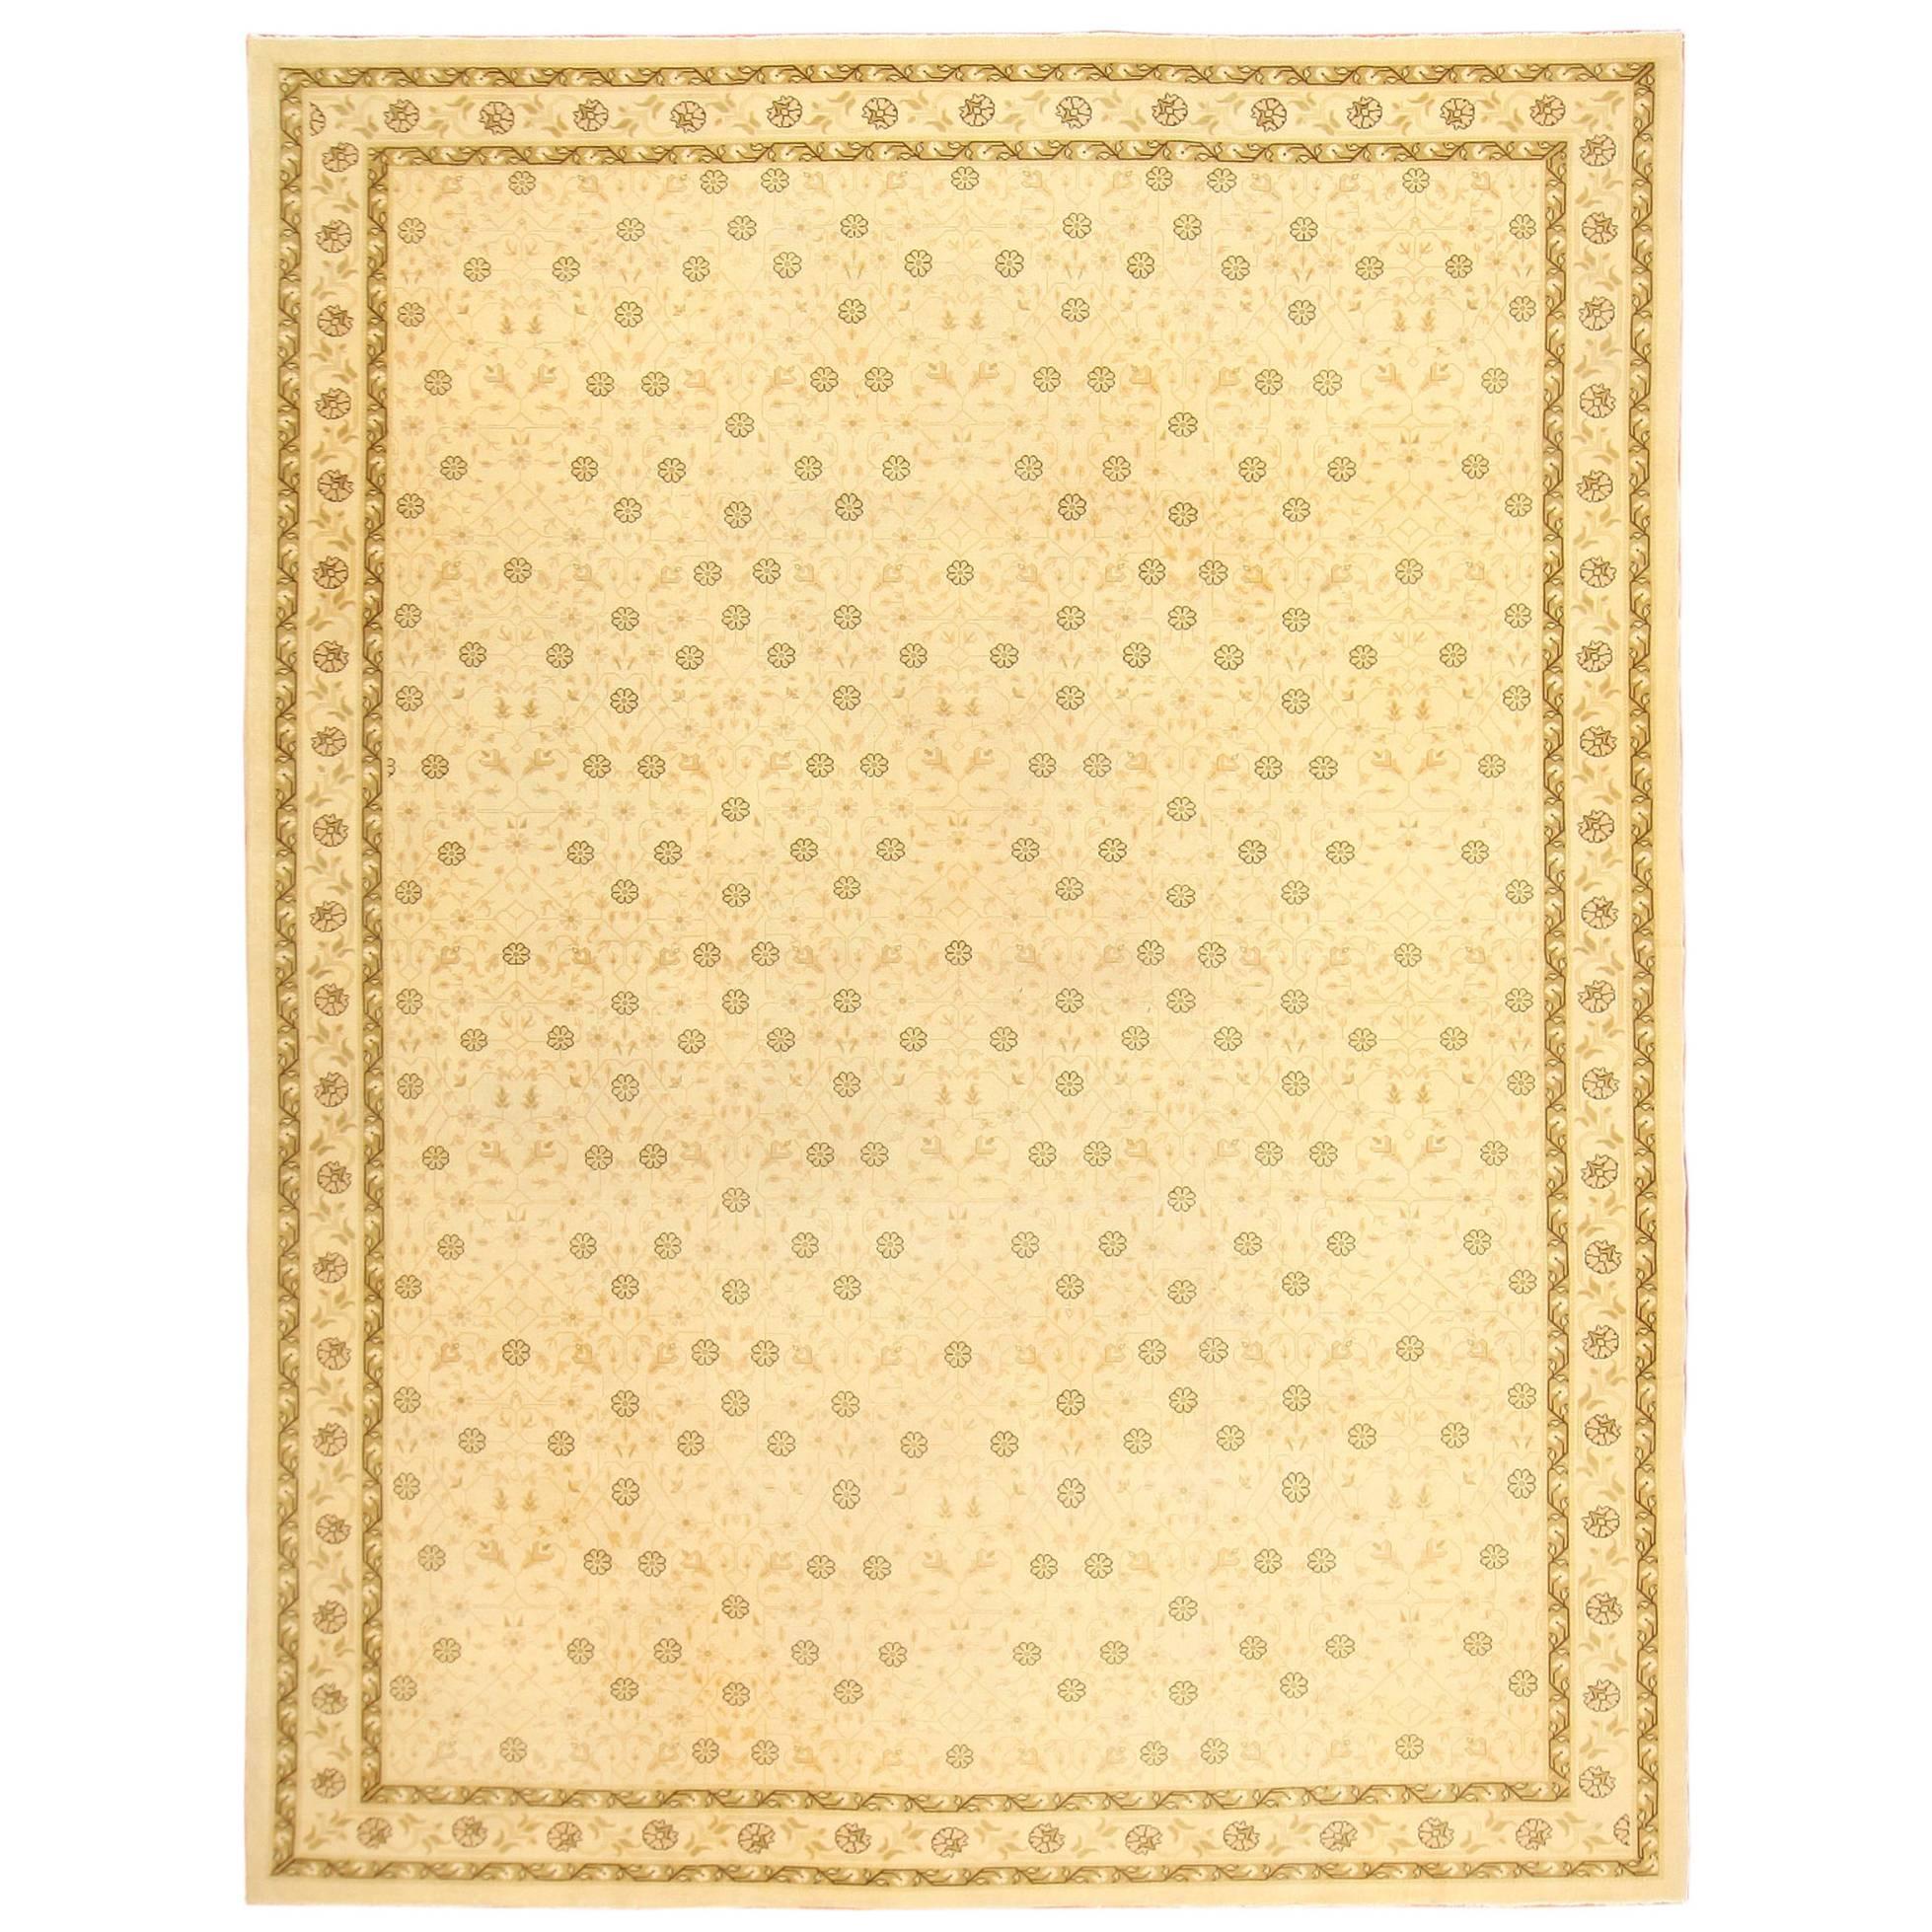 Decorative Ivory and Green Vintage Spanish Rug